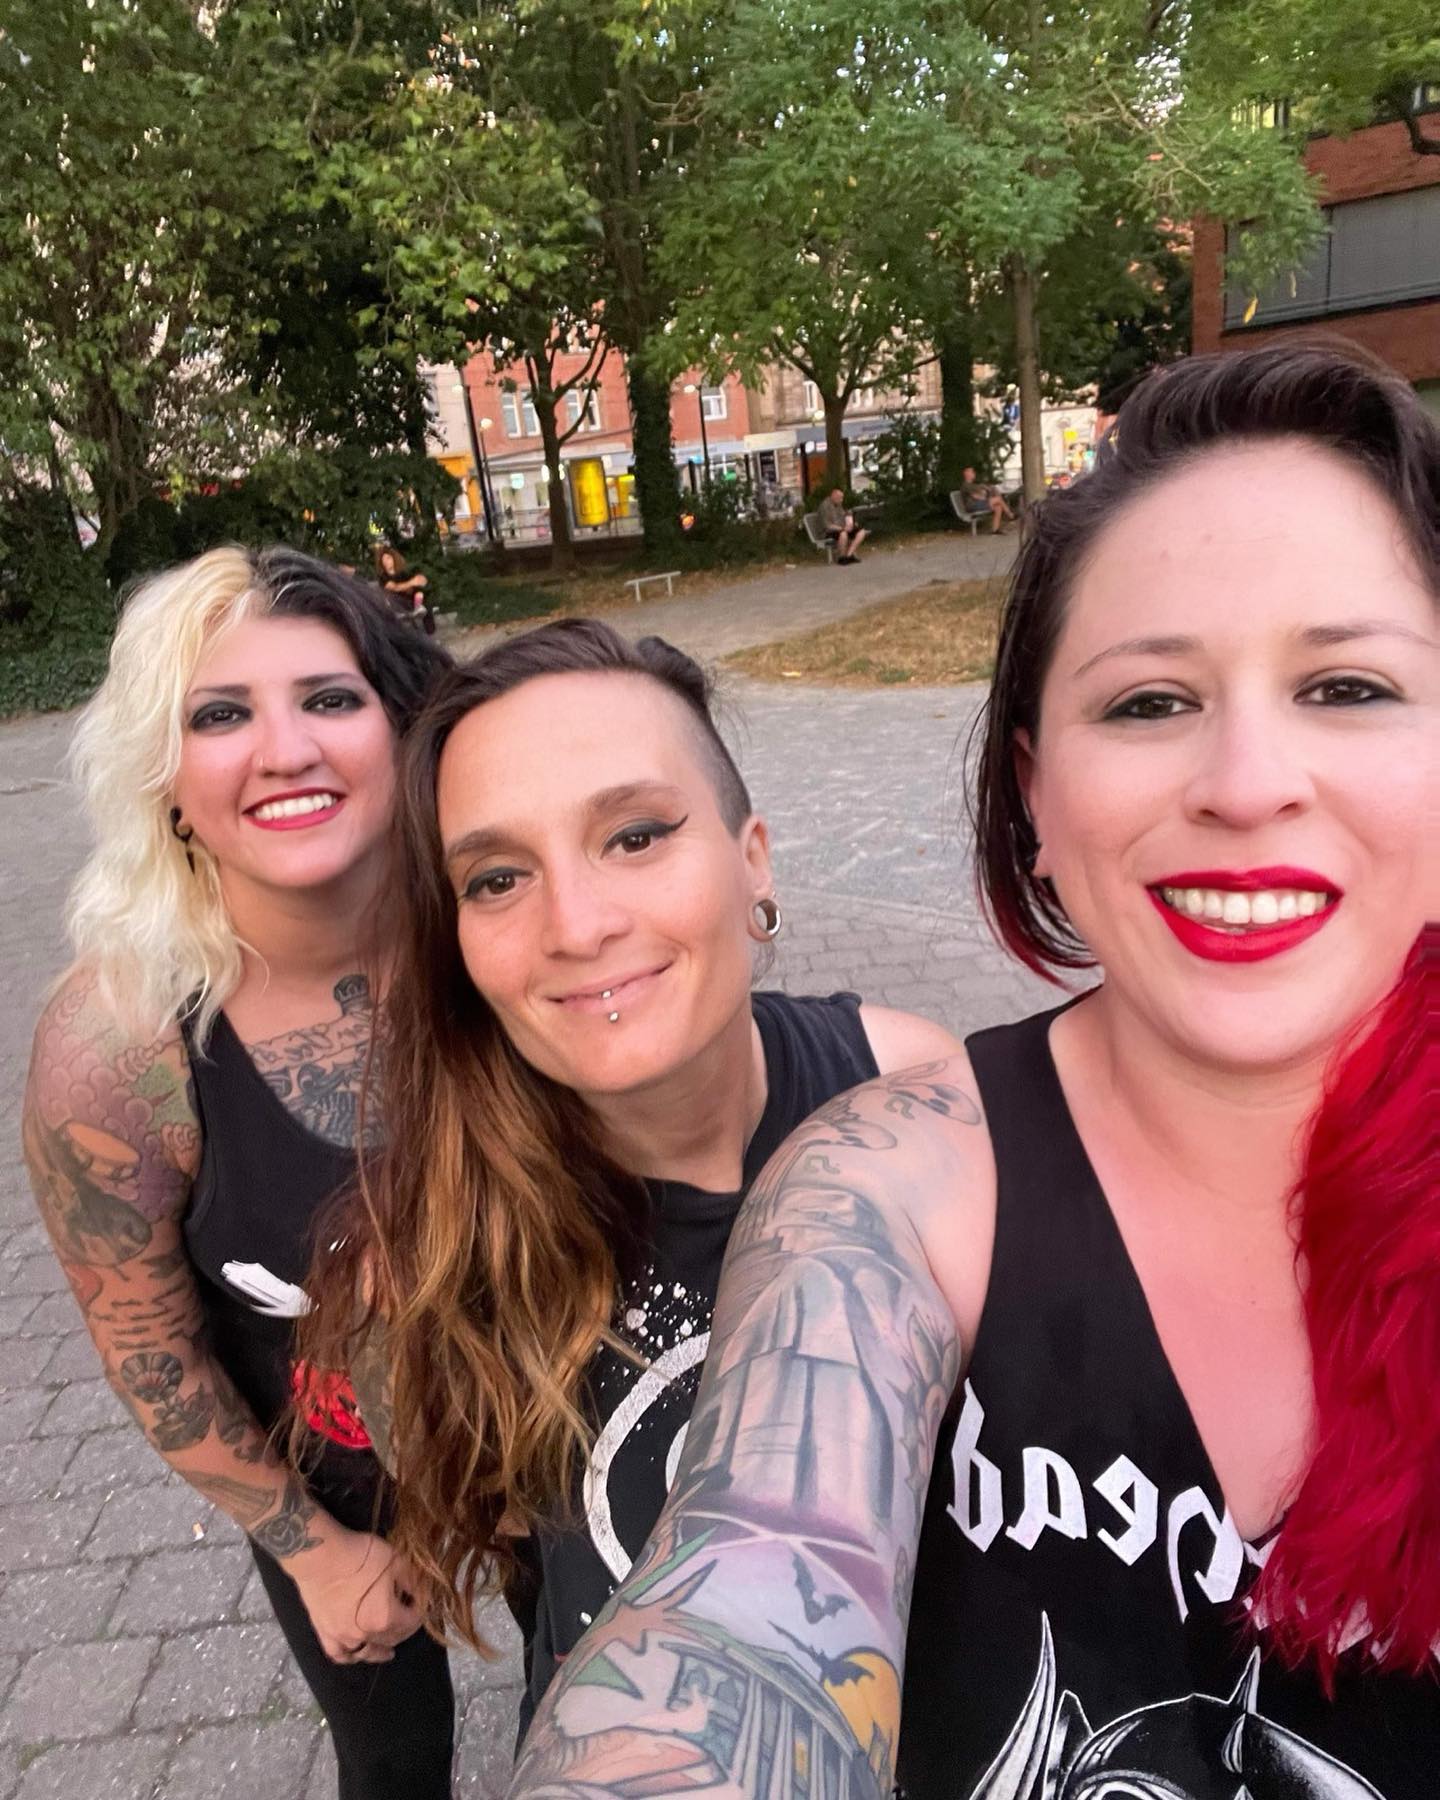 The Venomous Pinks are a trio featuring Drea Doll, Gaby Kaos, and Cassie Jalilie. Their kickass brand of punk rock is on tour with The Queers.